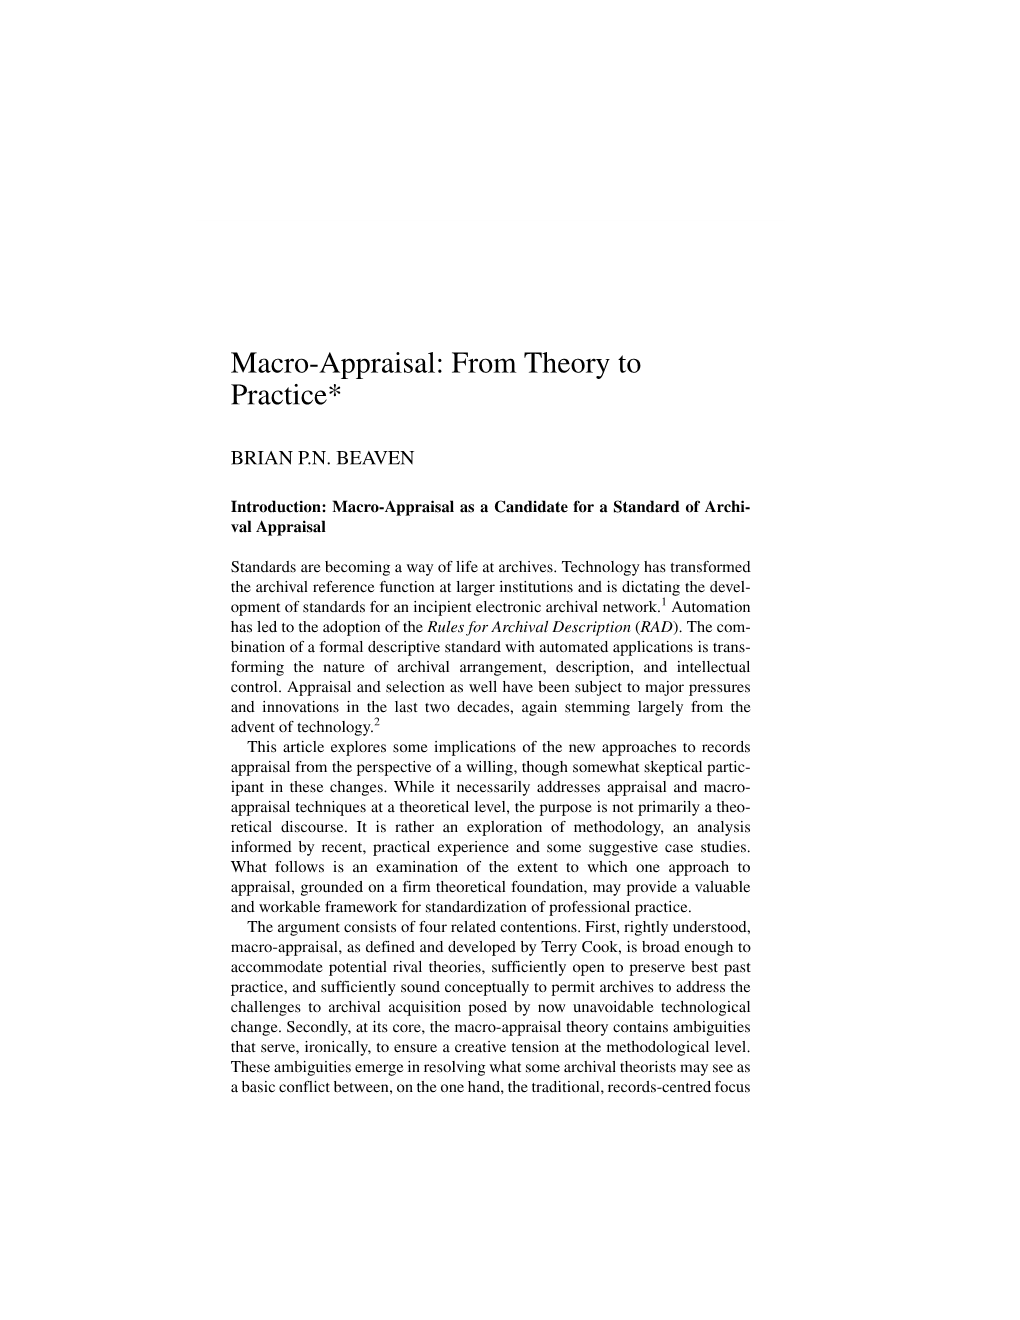 Macro-Appraisal: from Theory to Practice*